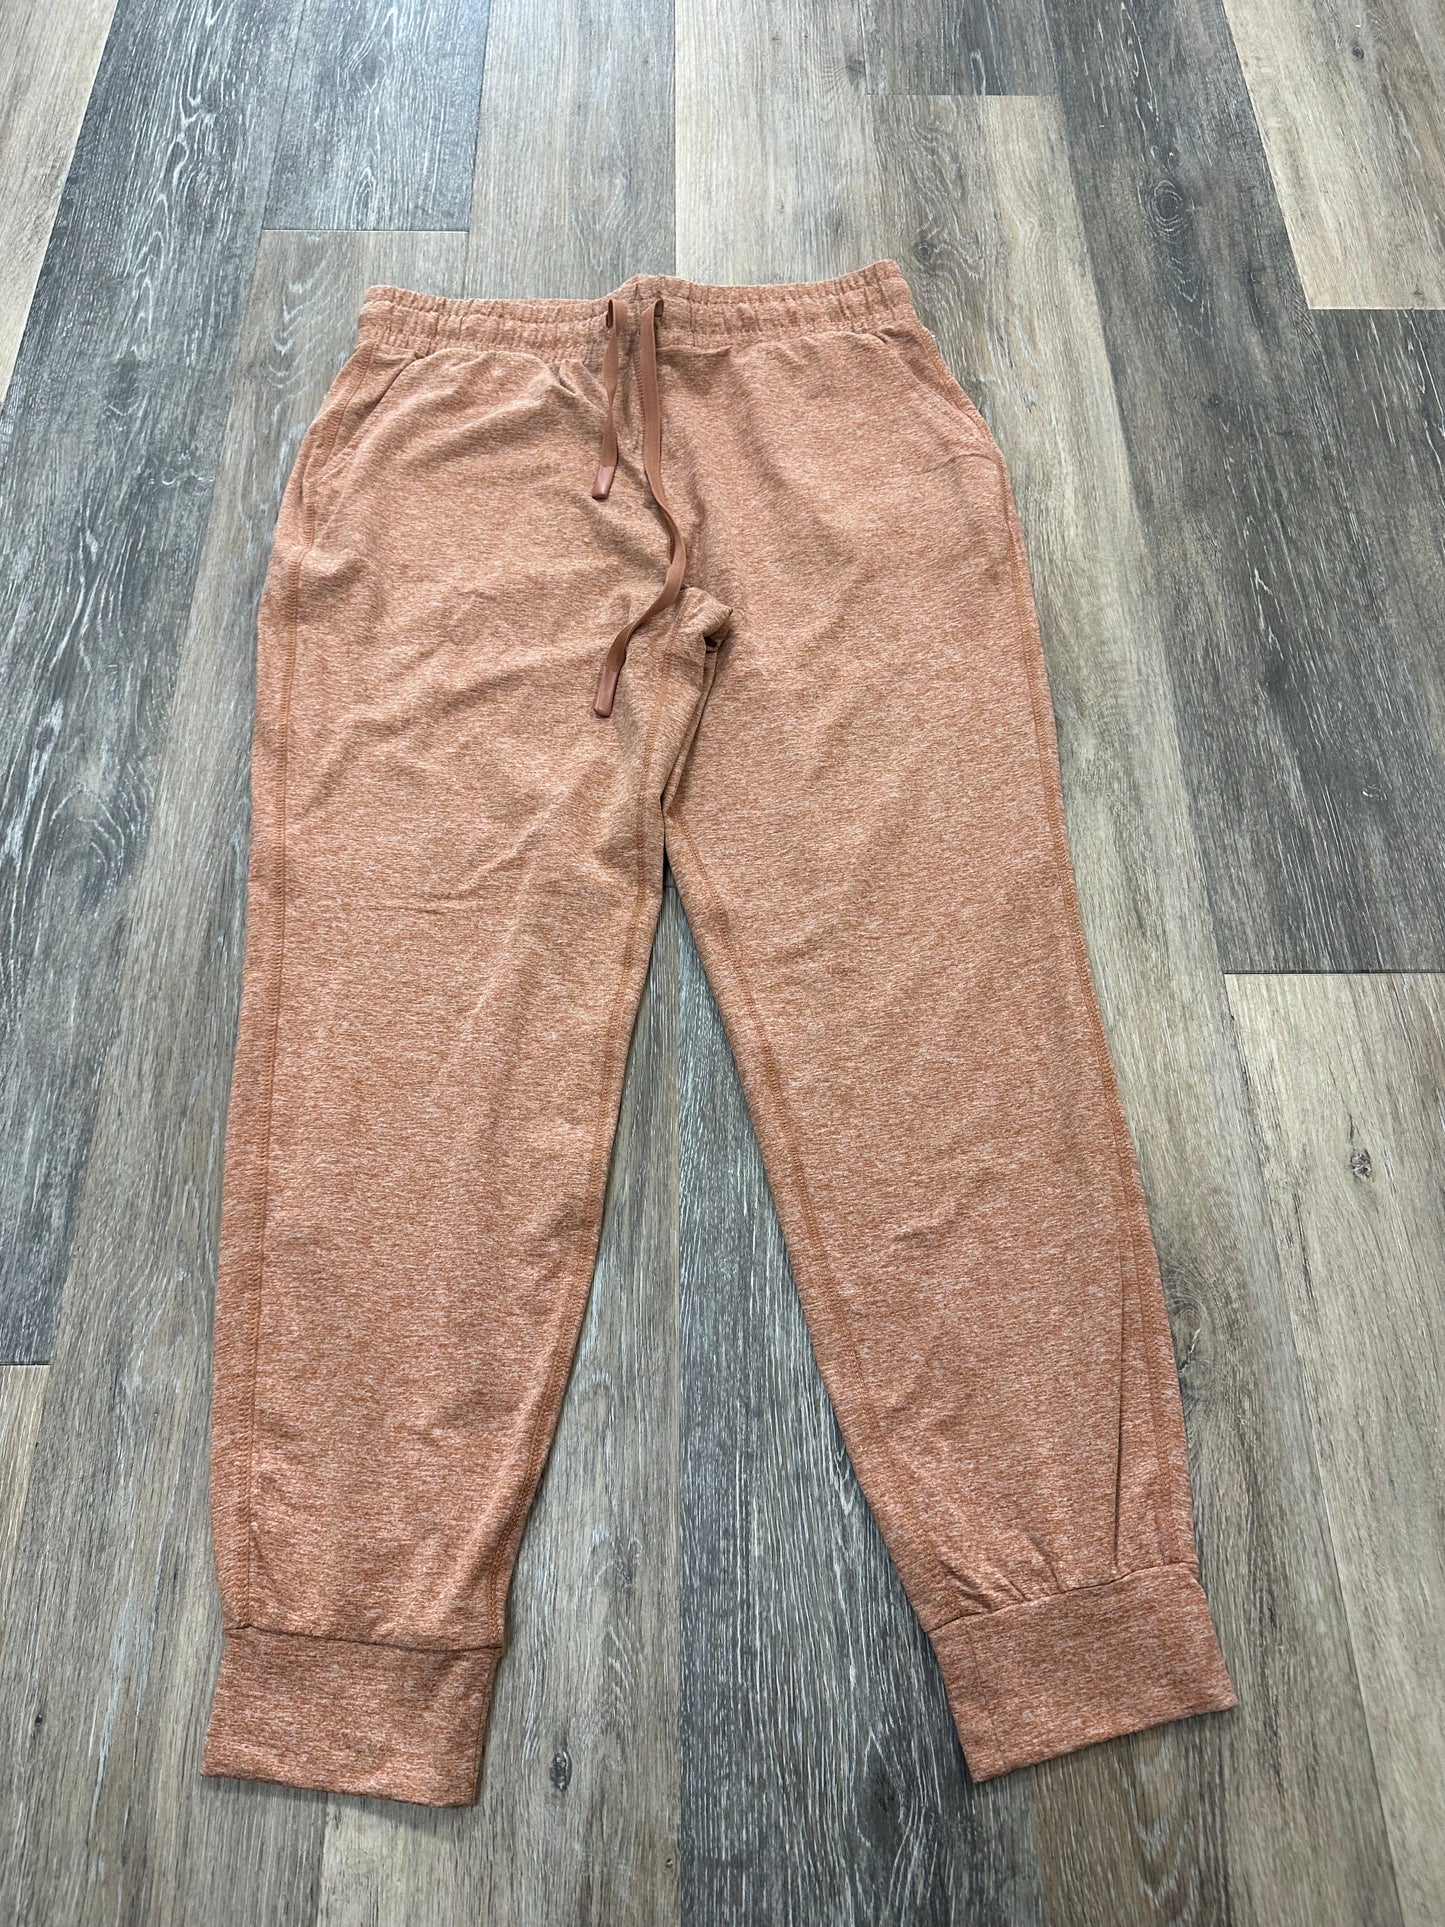 Lounge Set Pants By Thread And Supply  Size: M